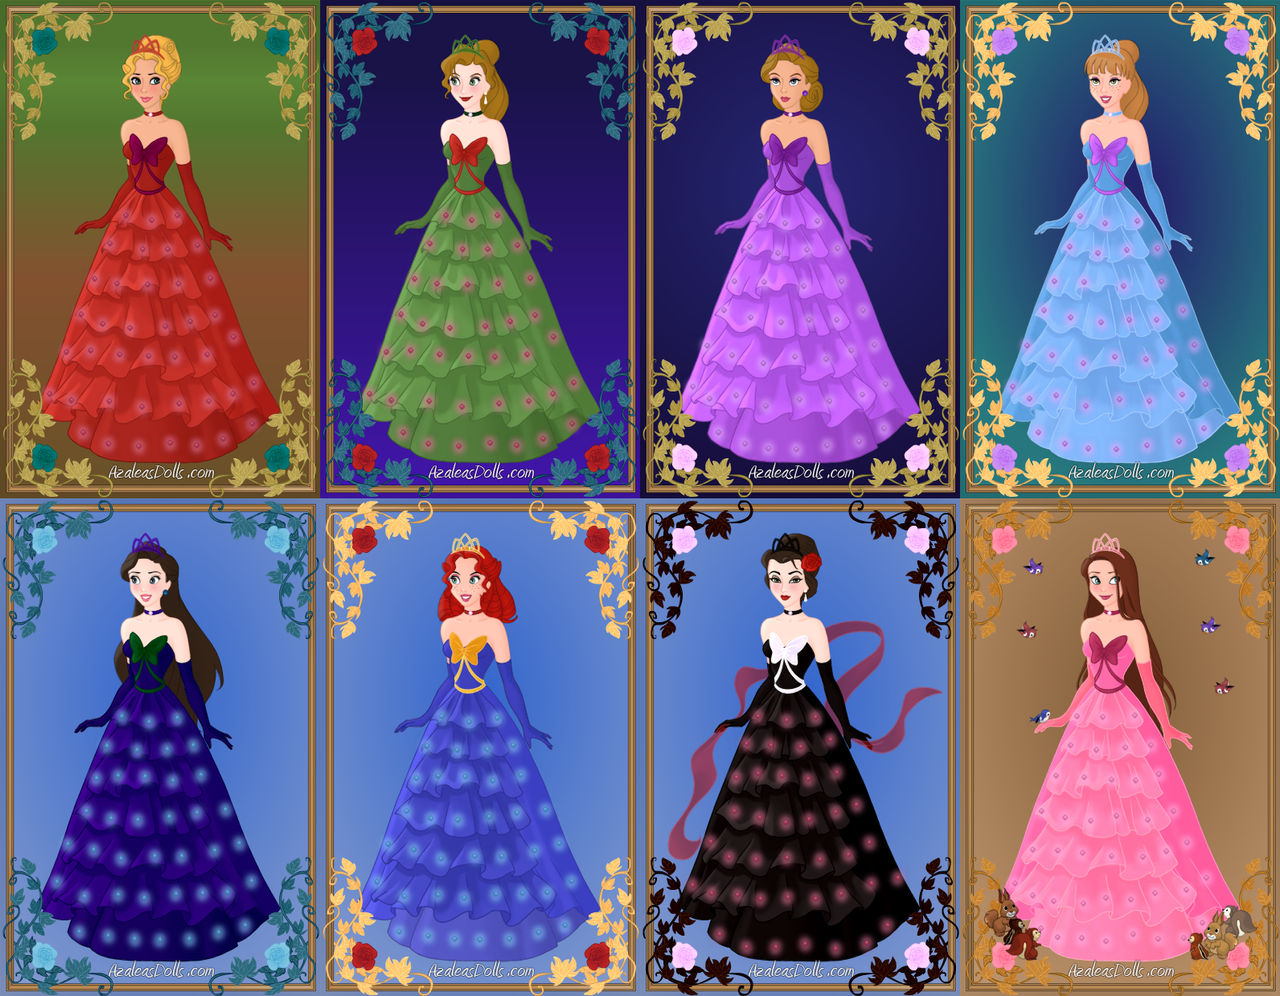 Azalea's Dress up Dolls] Made this thinking of the modern Bond movies :  r/DressUpGames